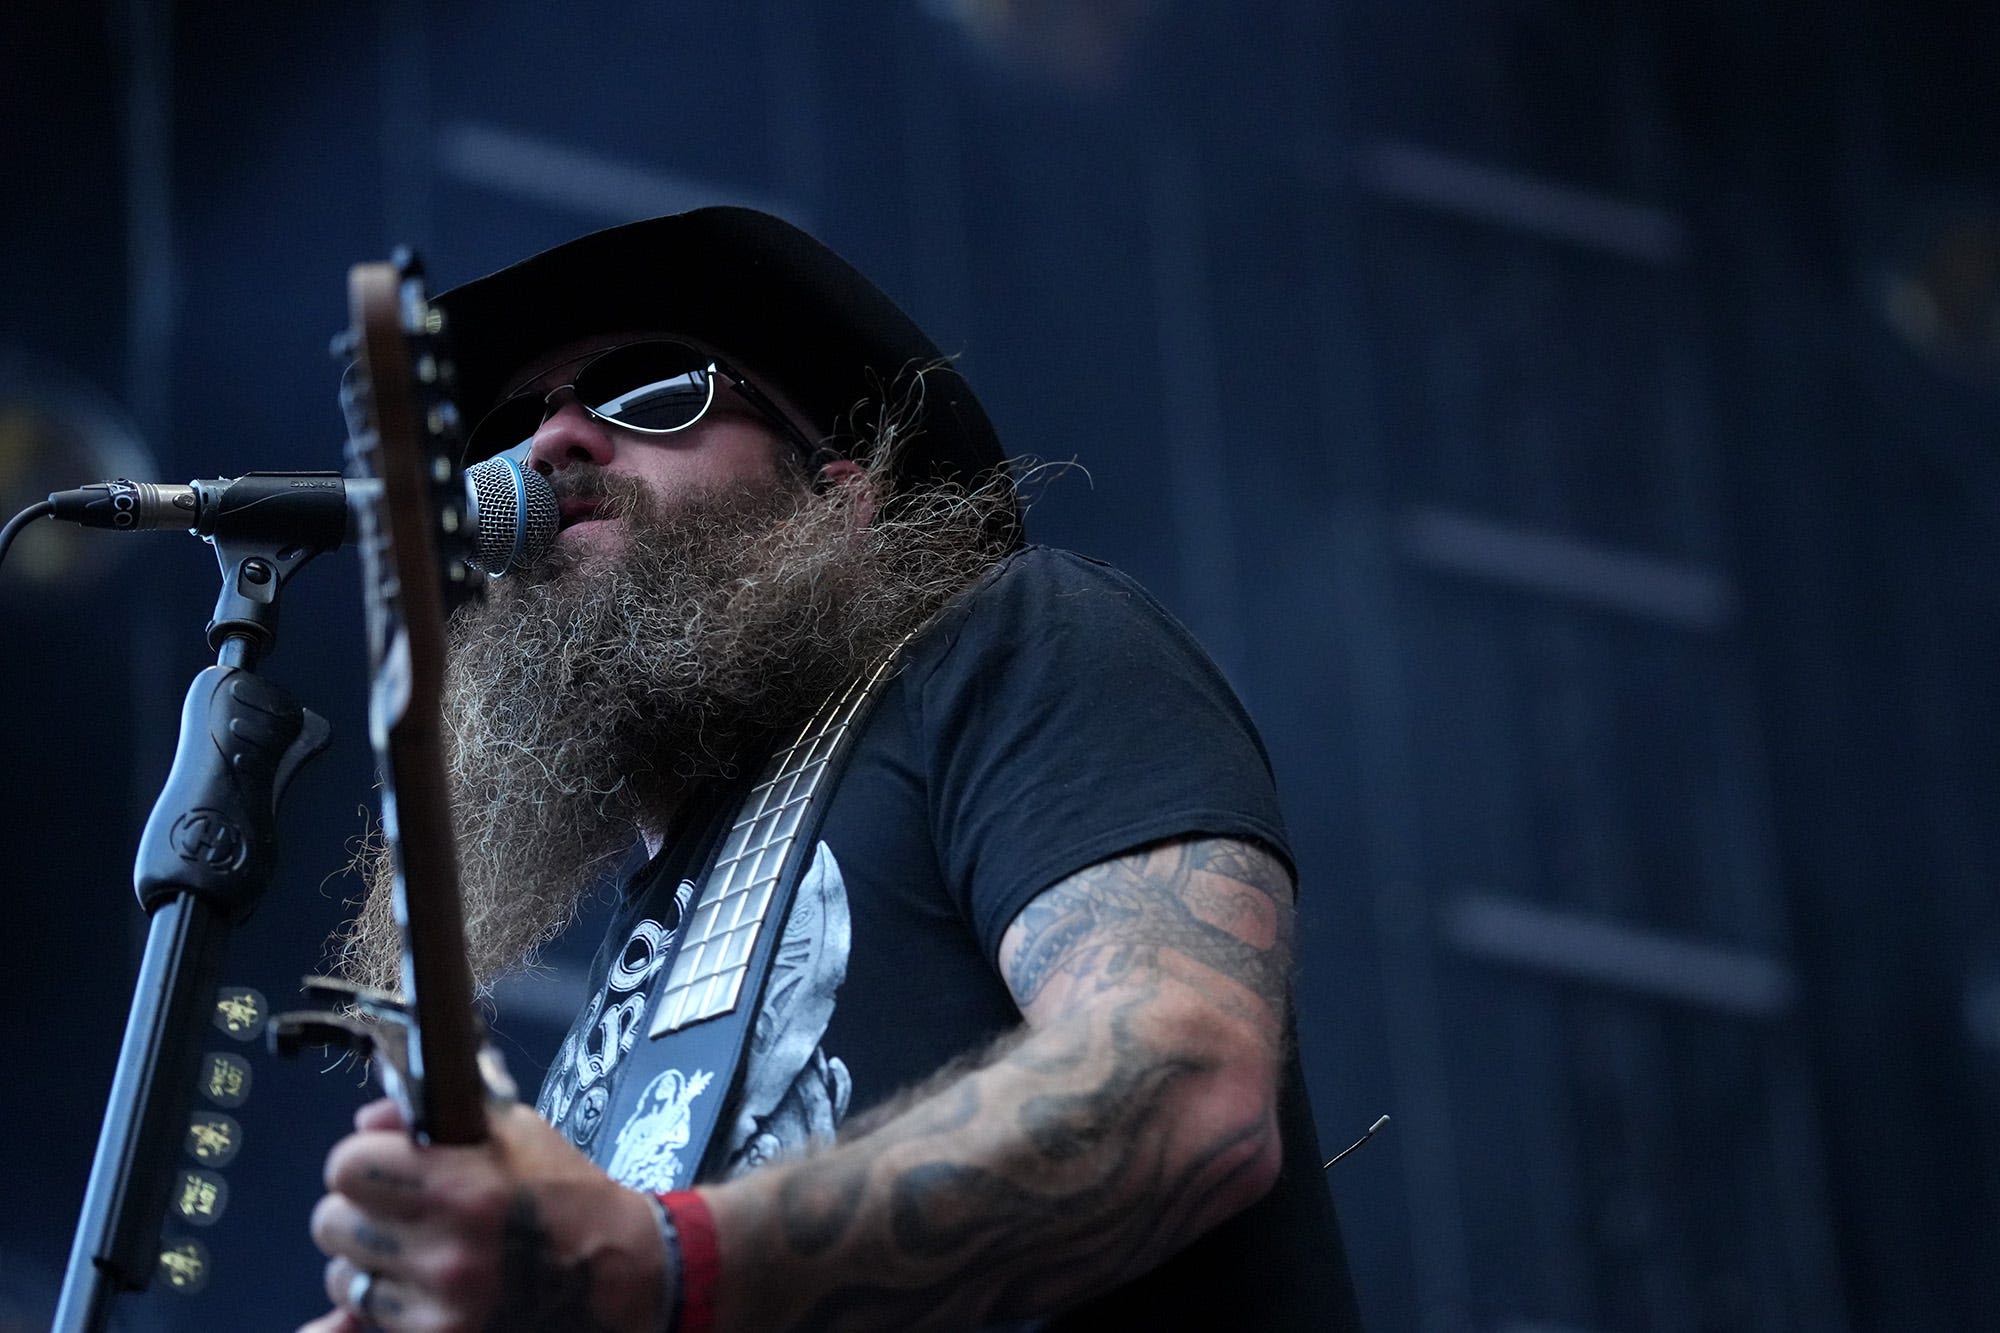 Going to the Cody Jinks concert at CMAC? Here's the weather forecast for the show